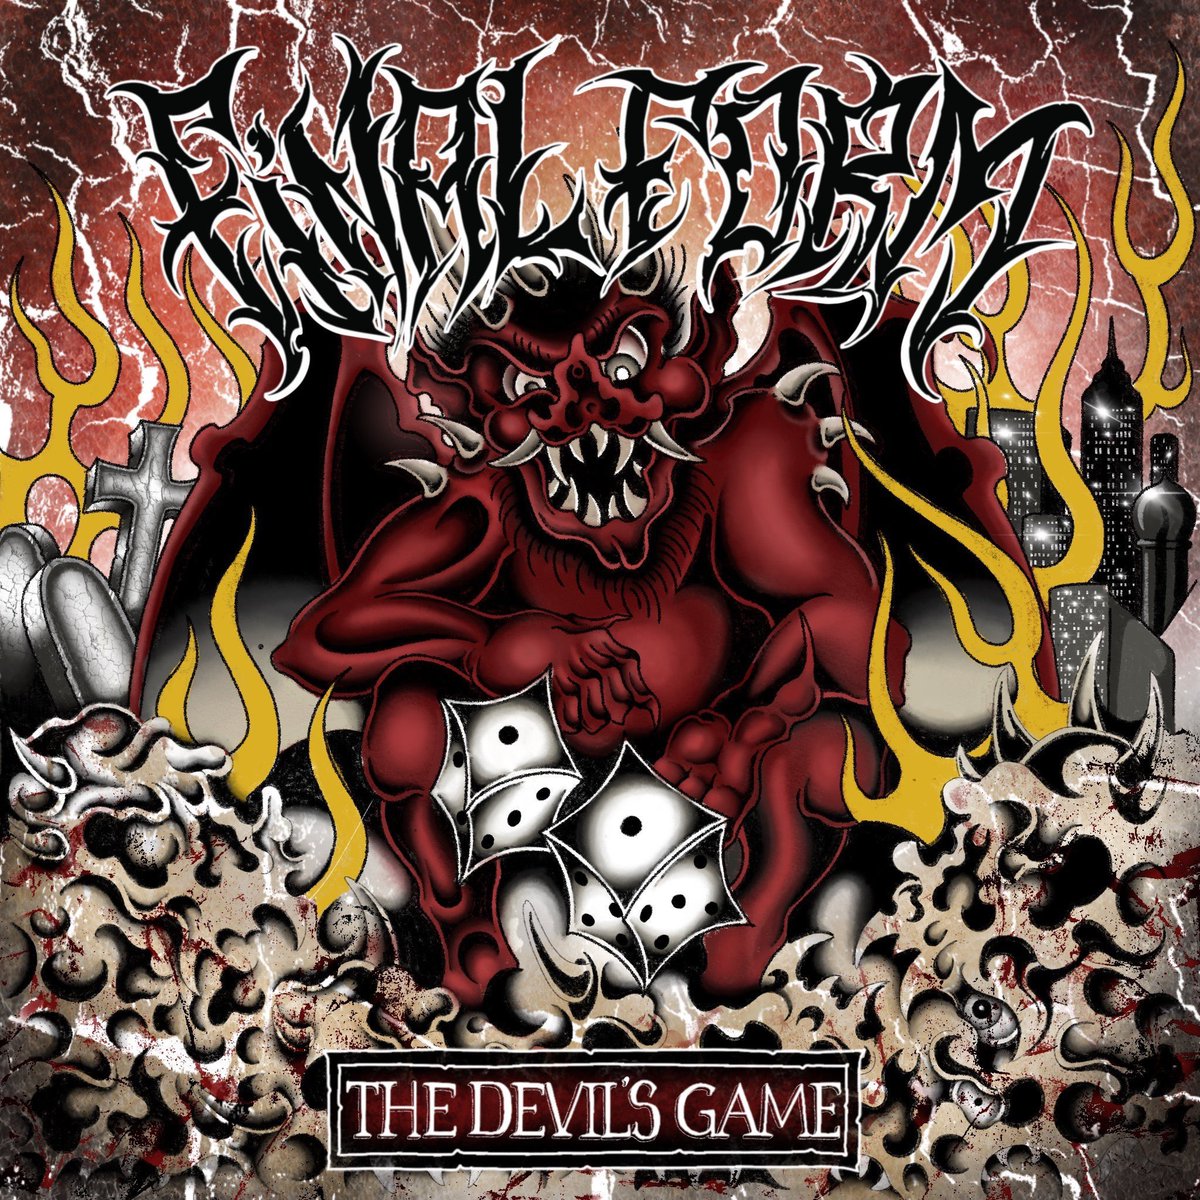 UKHC

New Final Form record out today called The Devils Game

The Coming Strife never miss

open.spotify.com/album/47smt7Pg…